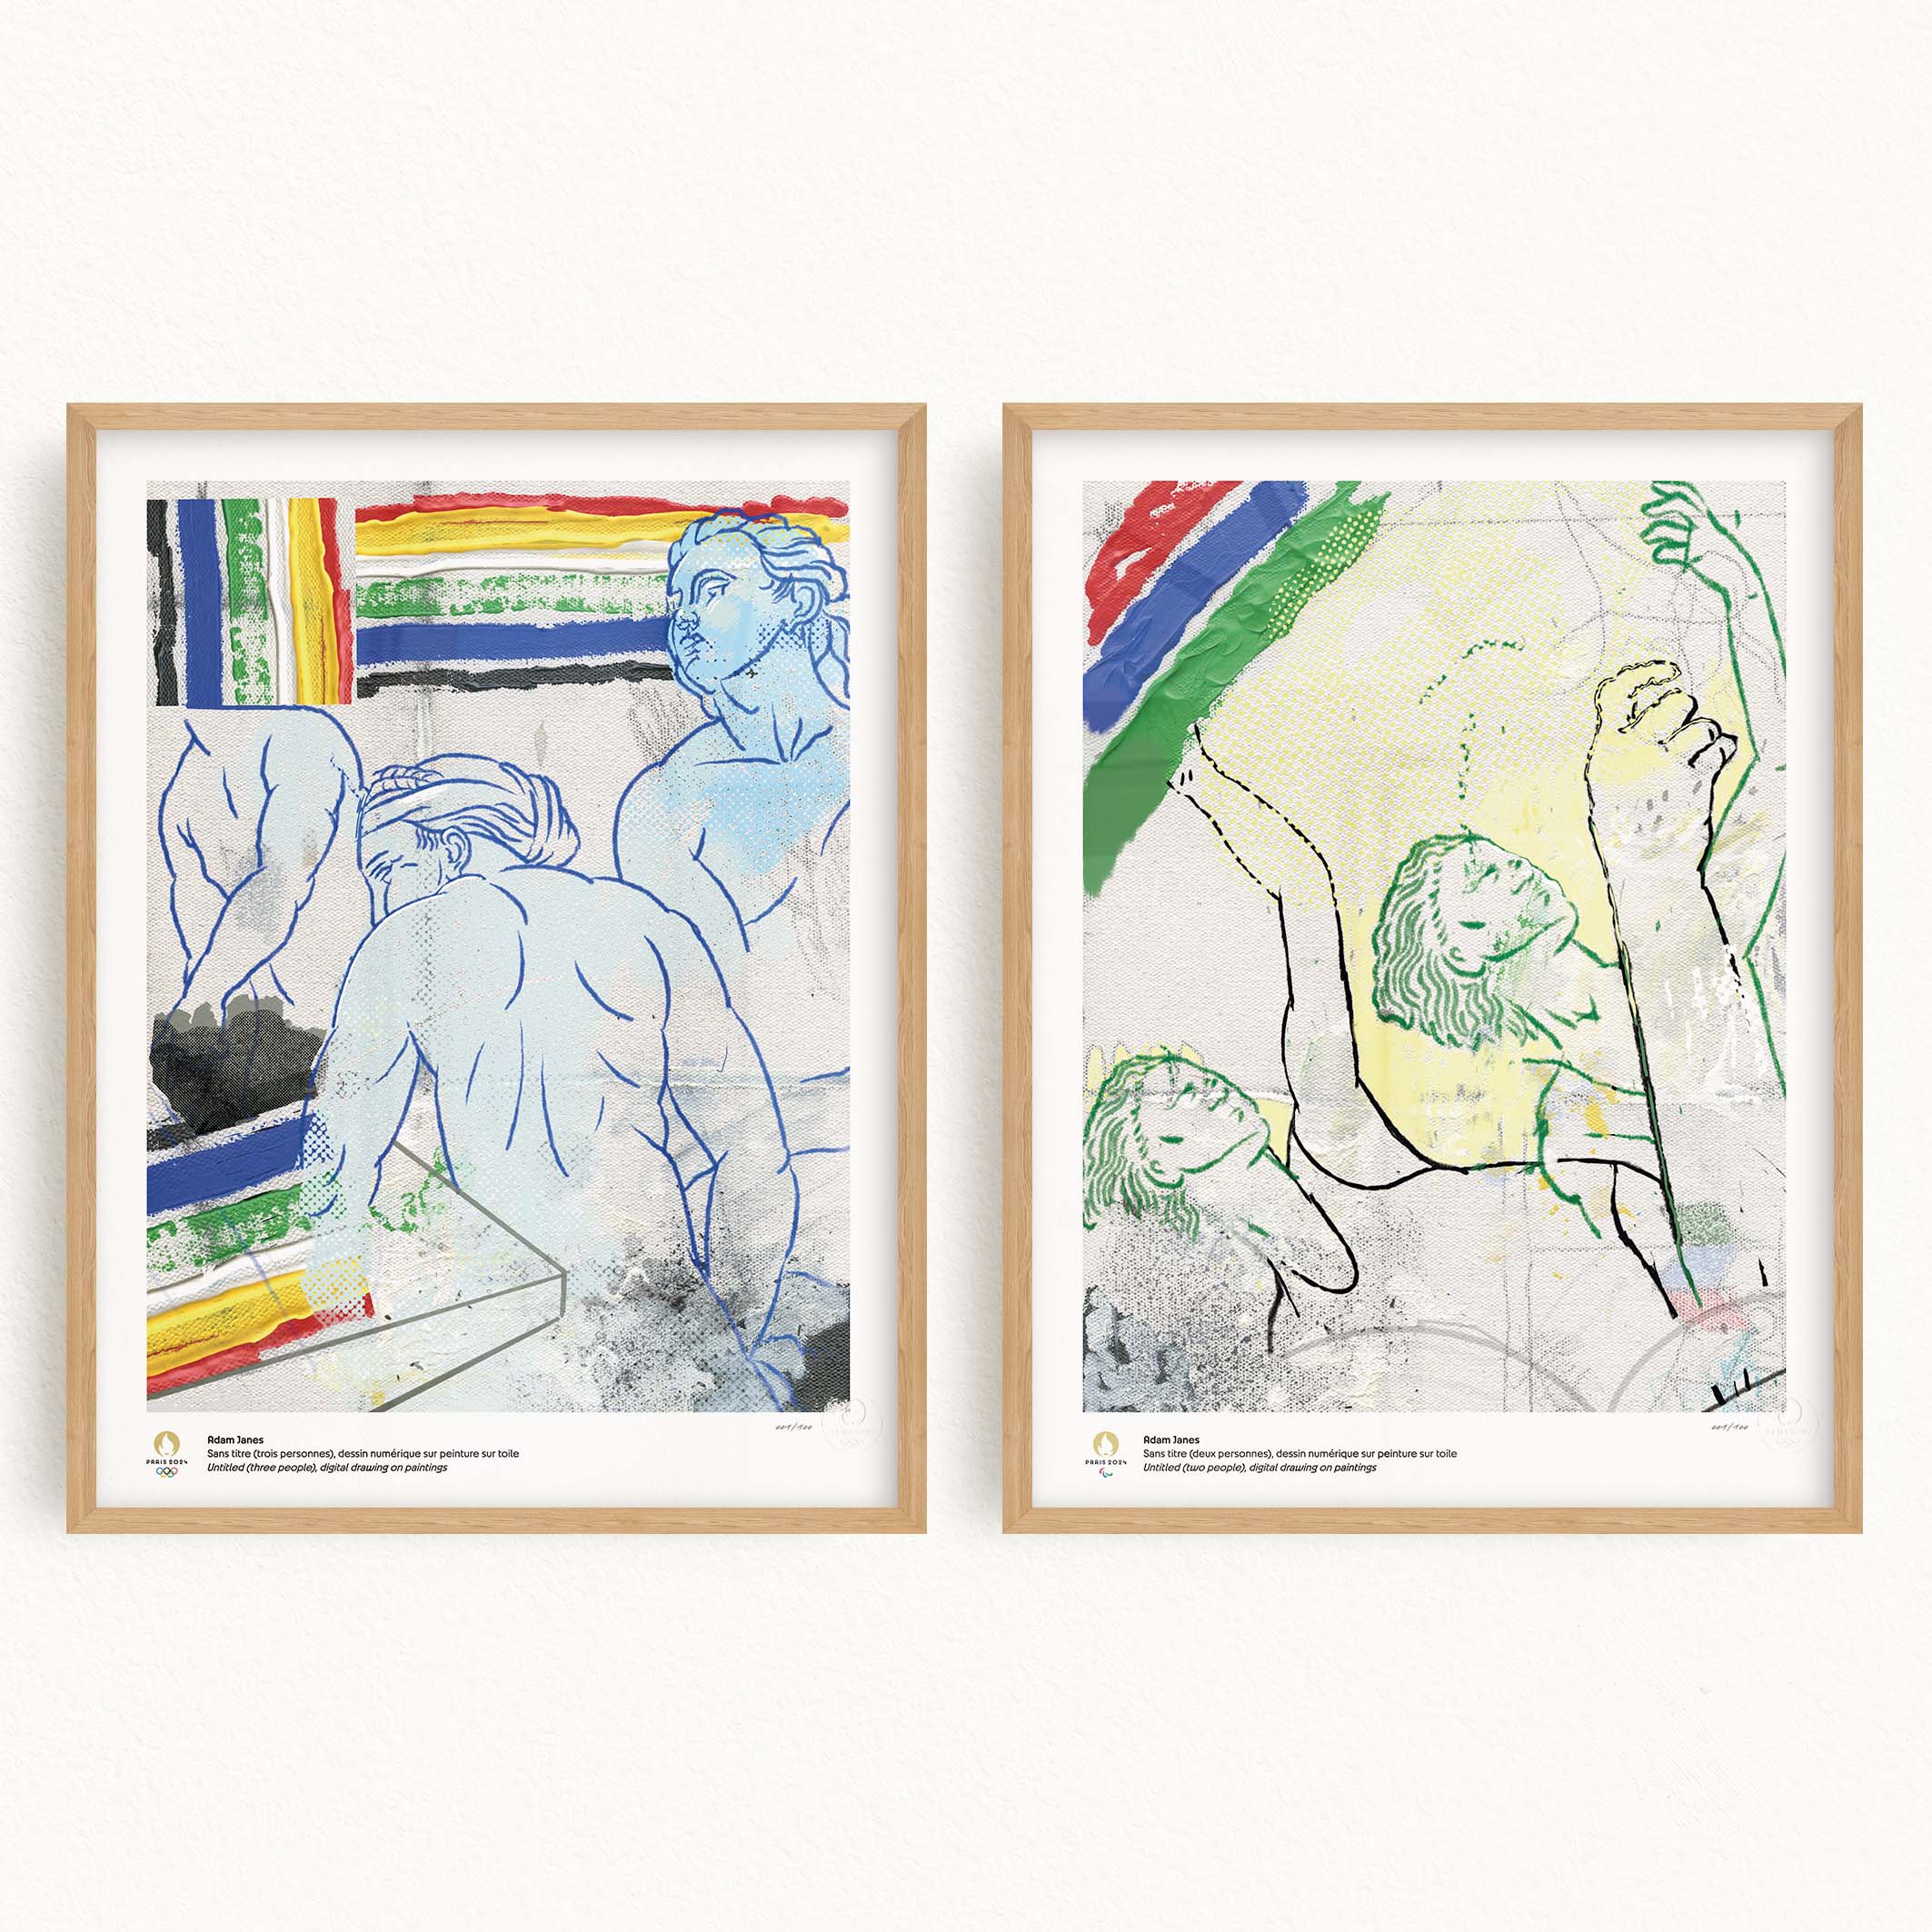 Diptych of Paris 2024 artistic posters for the Olympic and Paralympic games by Adam Janes 